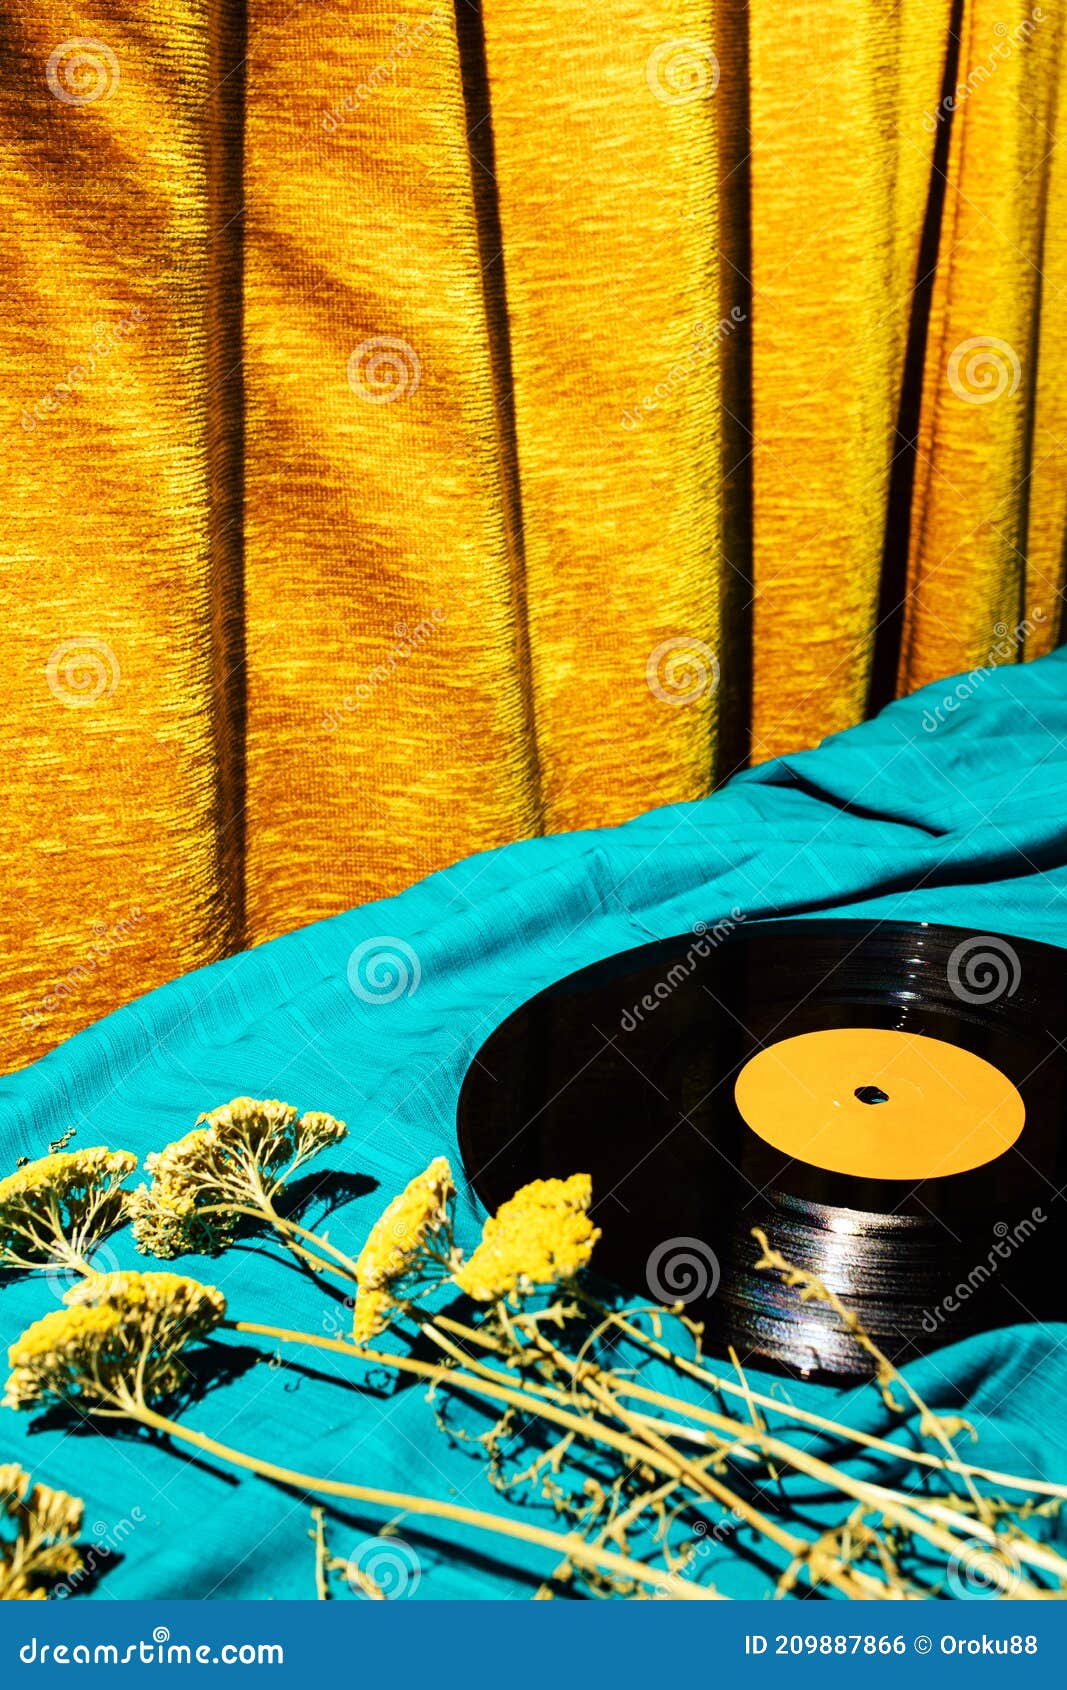 retro styled image of lp vinyl record on a cyan silk or saten fabric with dry old flowers and gold orange curtain in the